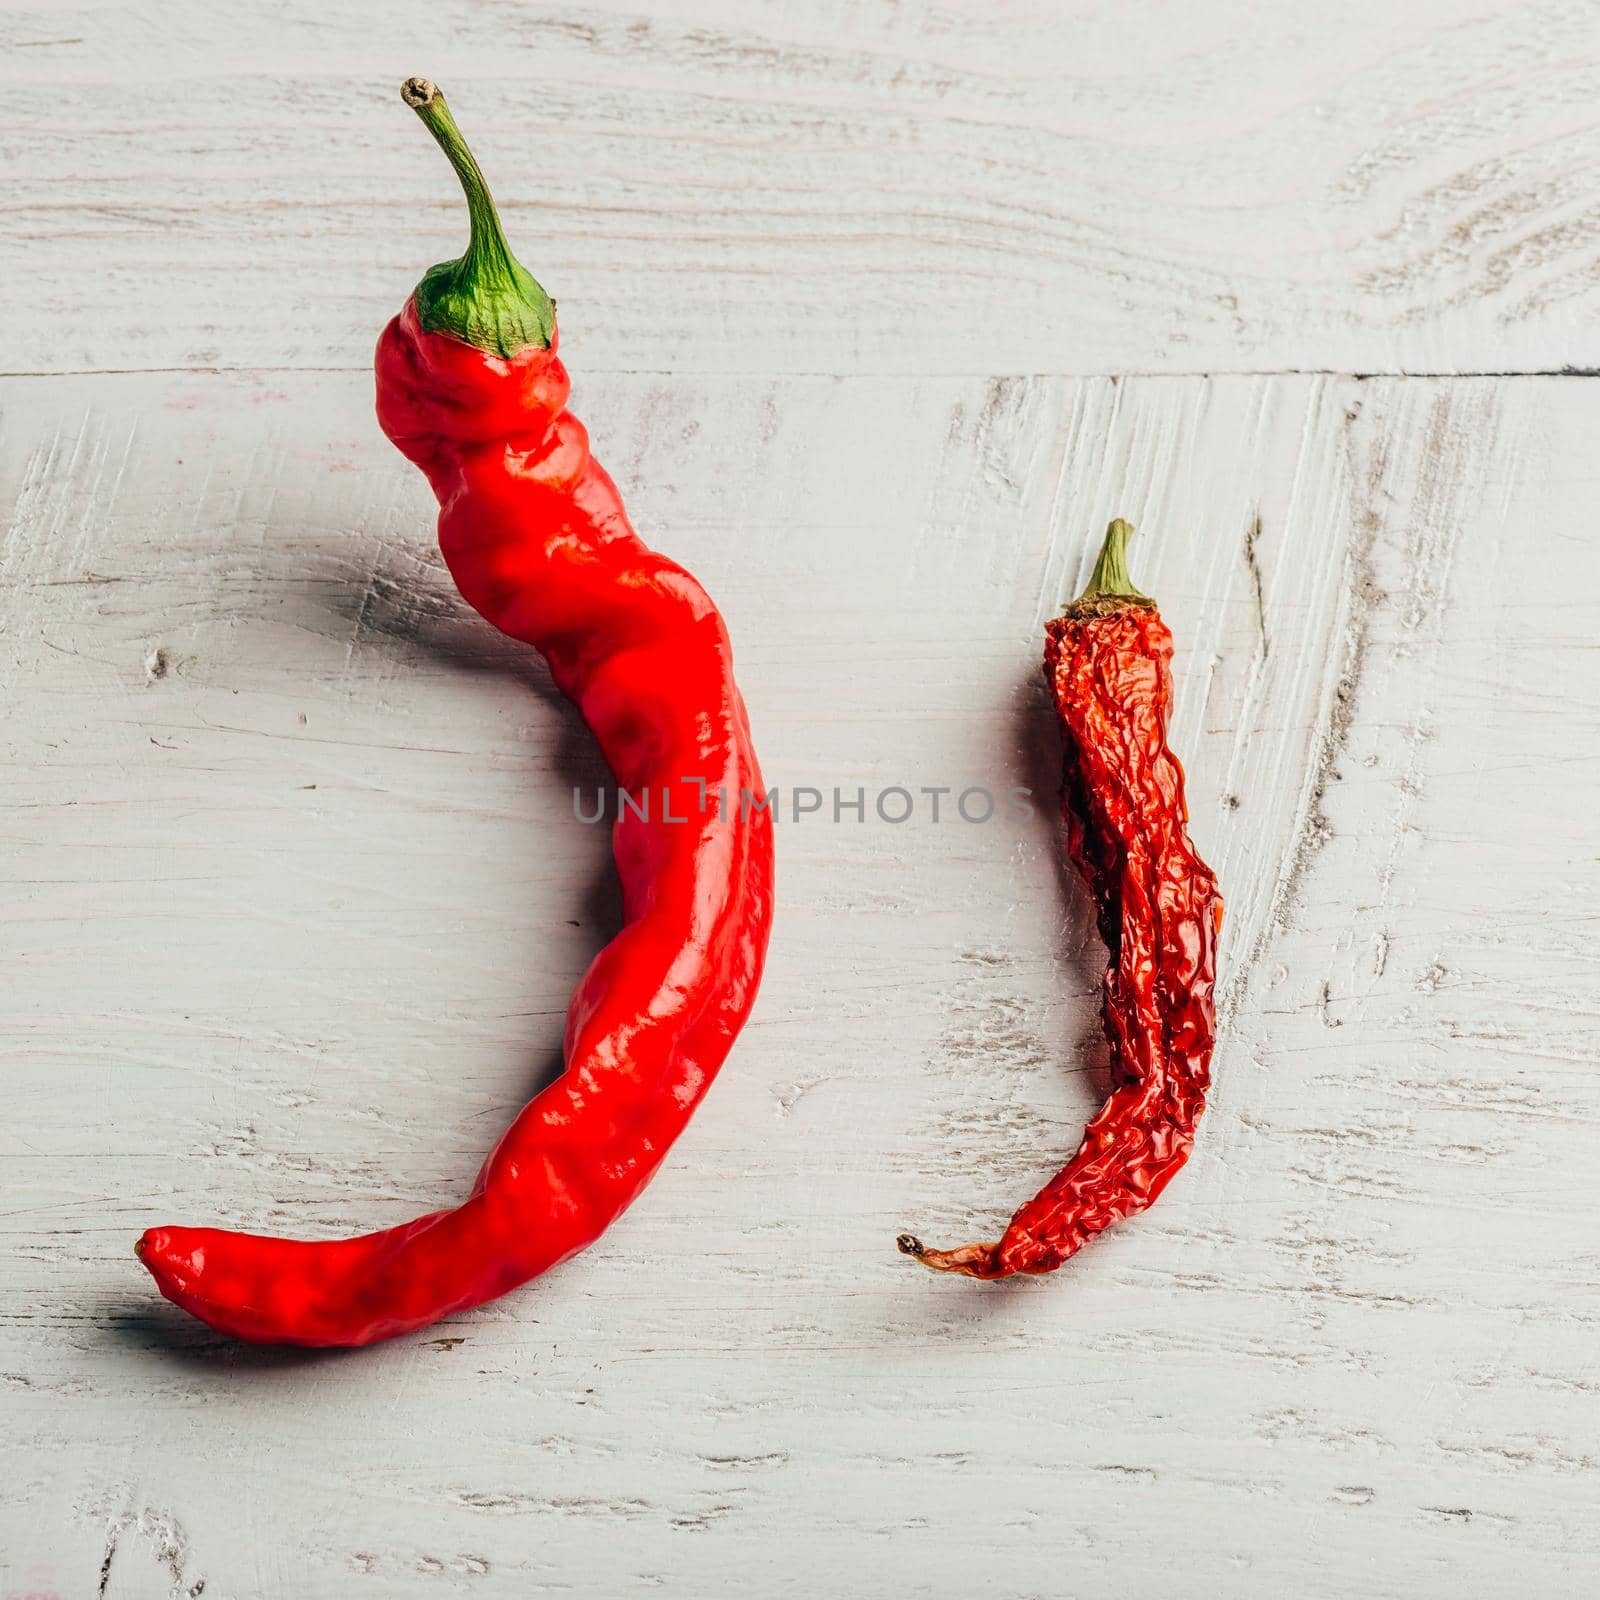 Two red chili peppers, on wooden background by Seva_blsv